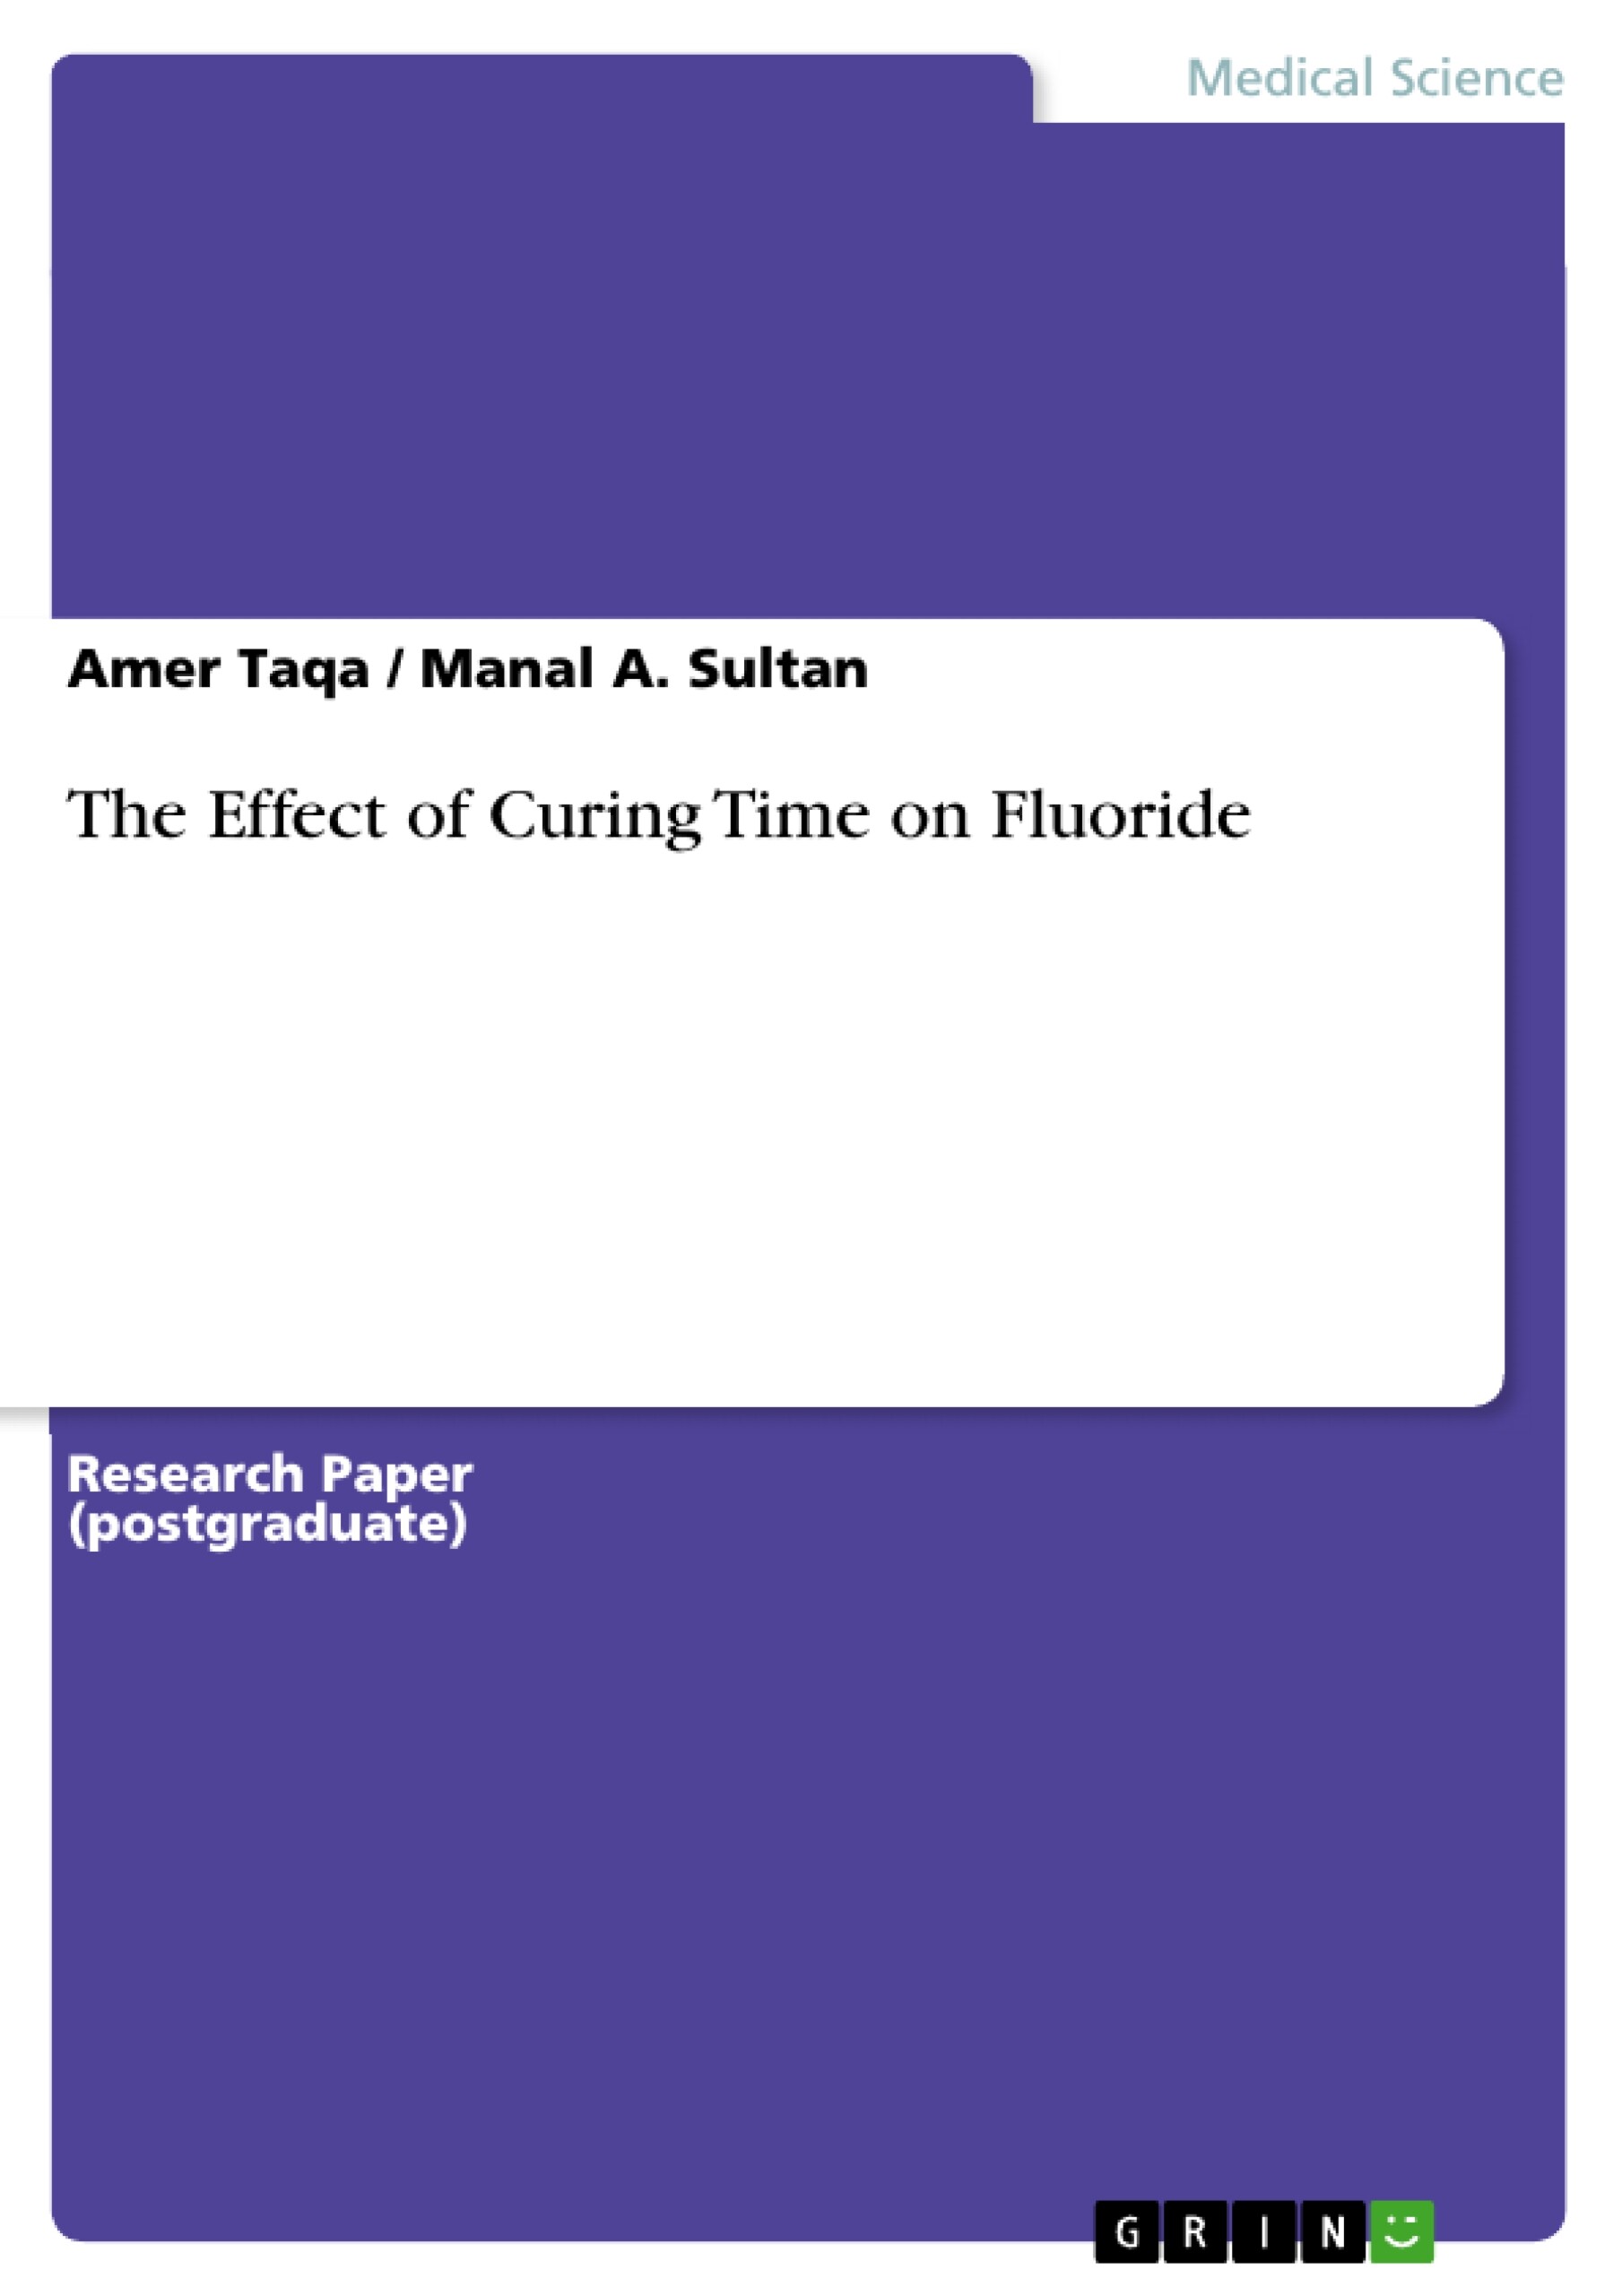 The Effect of Curing Time on Fluoride